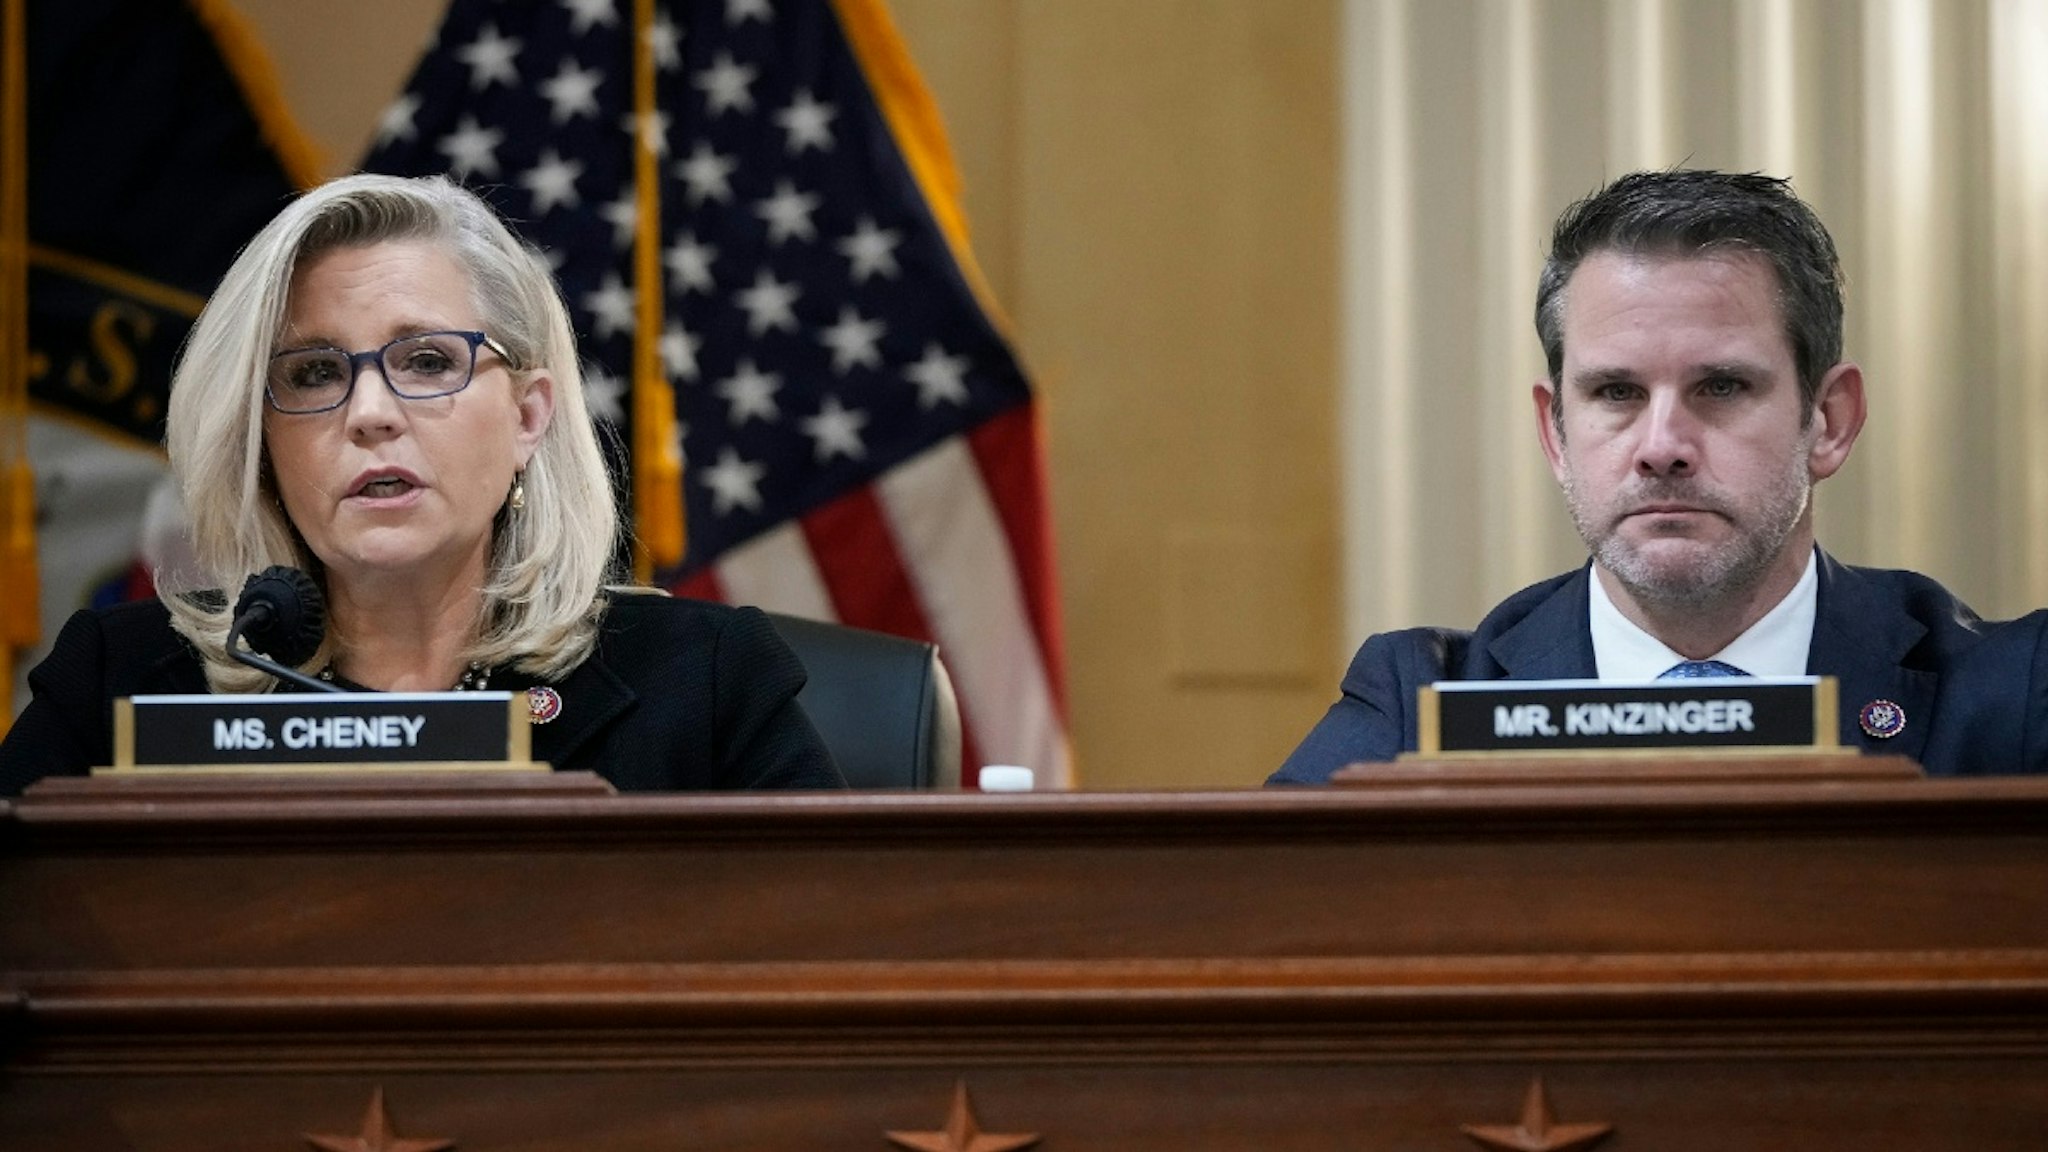 WASHINGTON, DC - DECEMBER 1: (L-R) Rep. Liz Cheney (R-WY), vice-chair of the select committee investigating the January 6 attack on the Capitol, and Rep. Adam Kinzinger (R-IL) listen during a committee meeting on Capitol Hill on December 1, 2021 in Washington, DC.